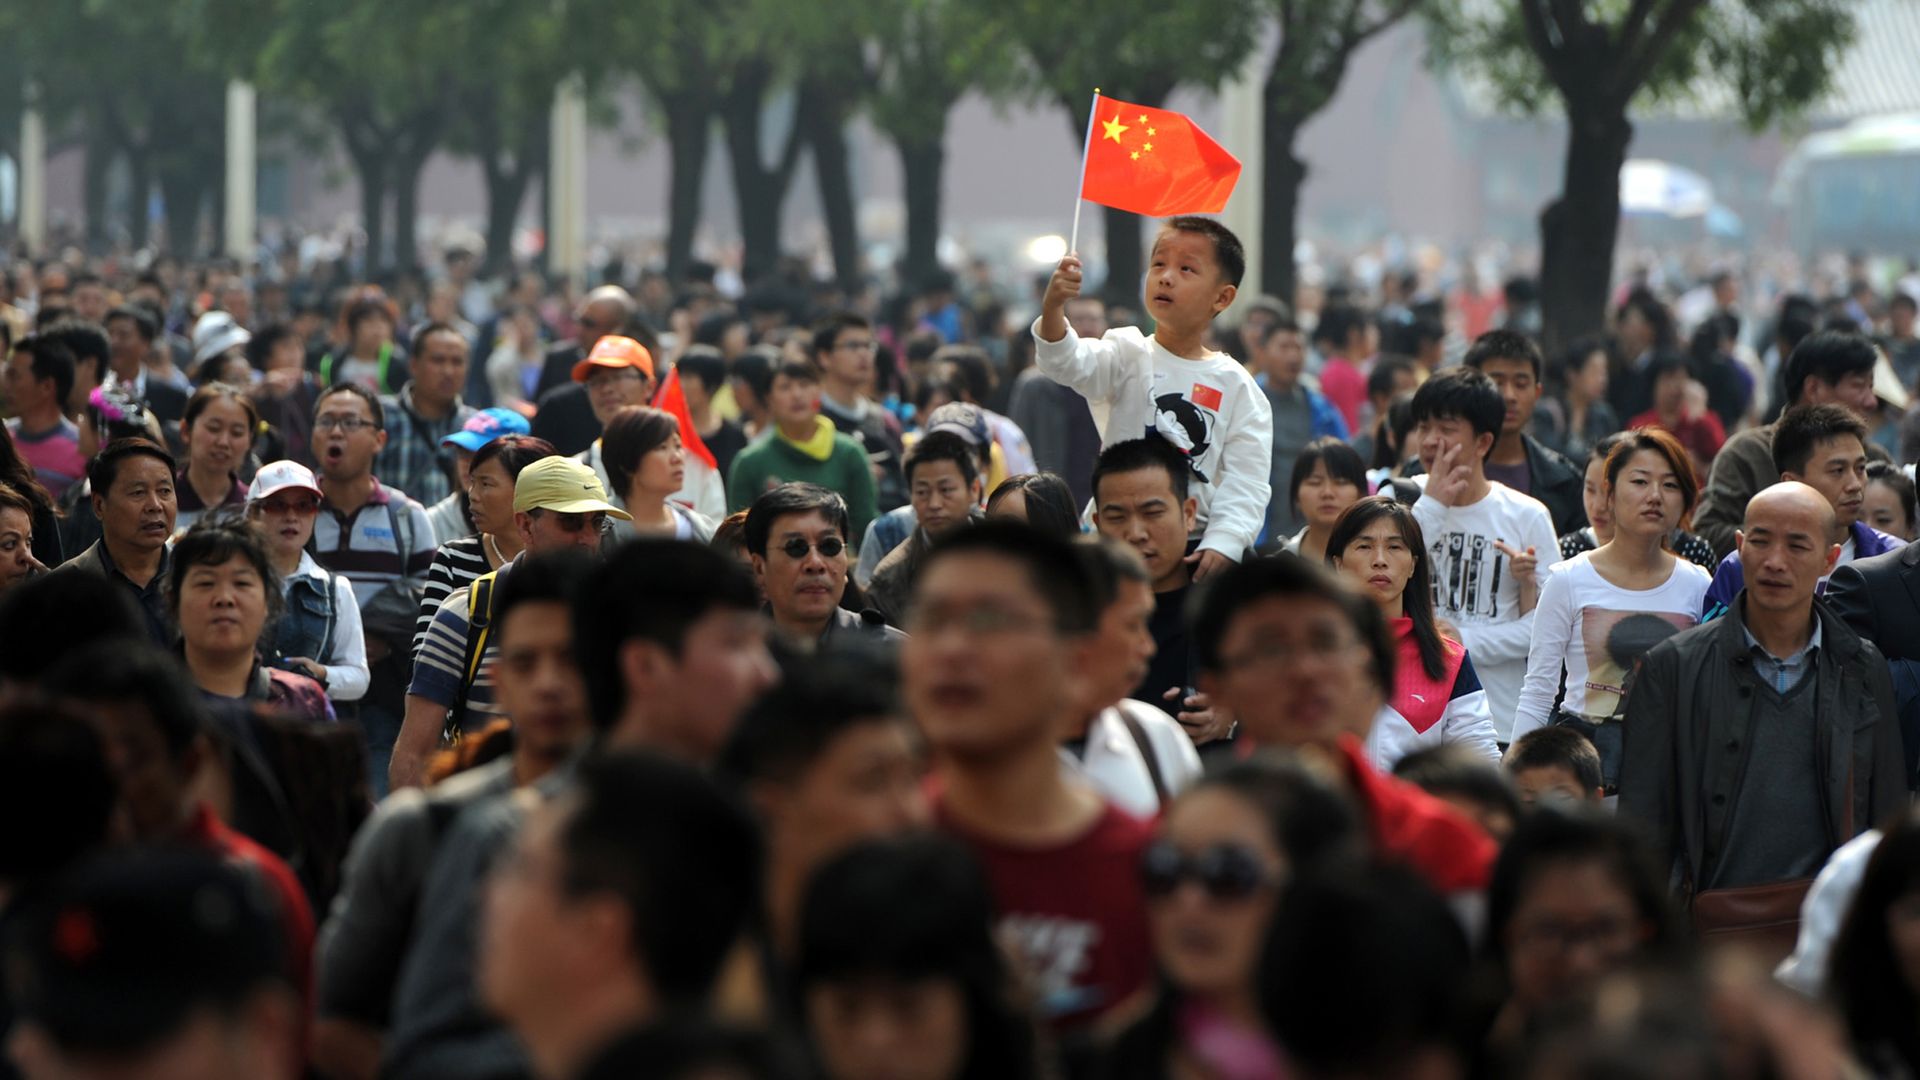 Photo of thousands of visitors making their way to the Forbidden City in Beijing for Golden Week with a cute boy on someone's shoulders waving a Chinese flag